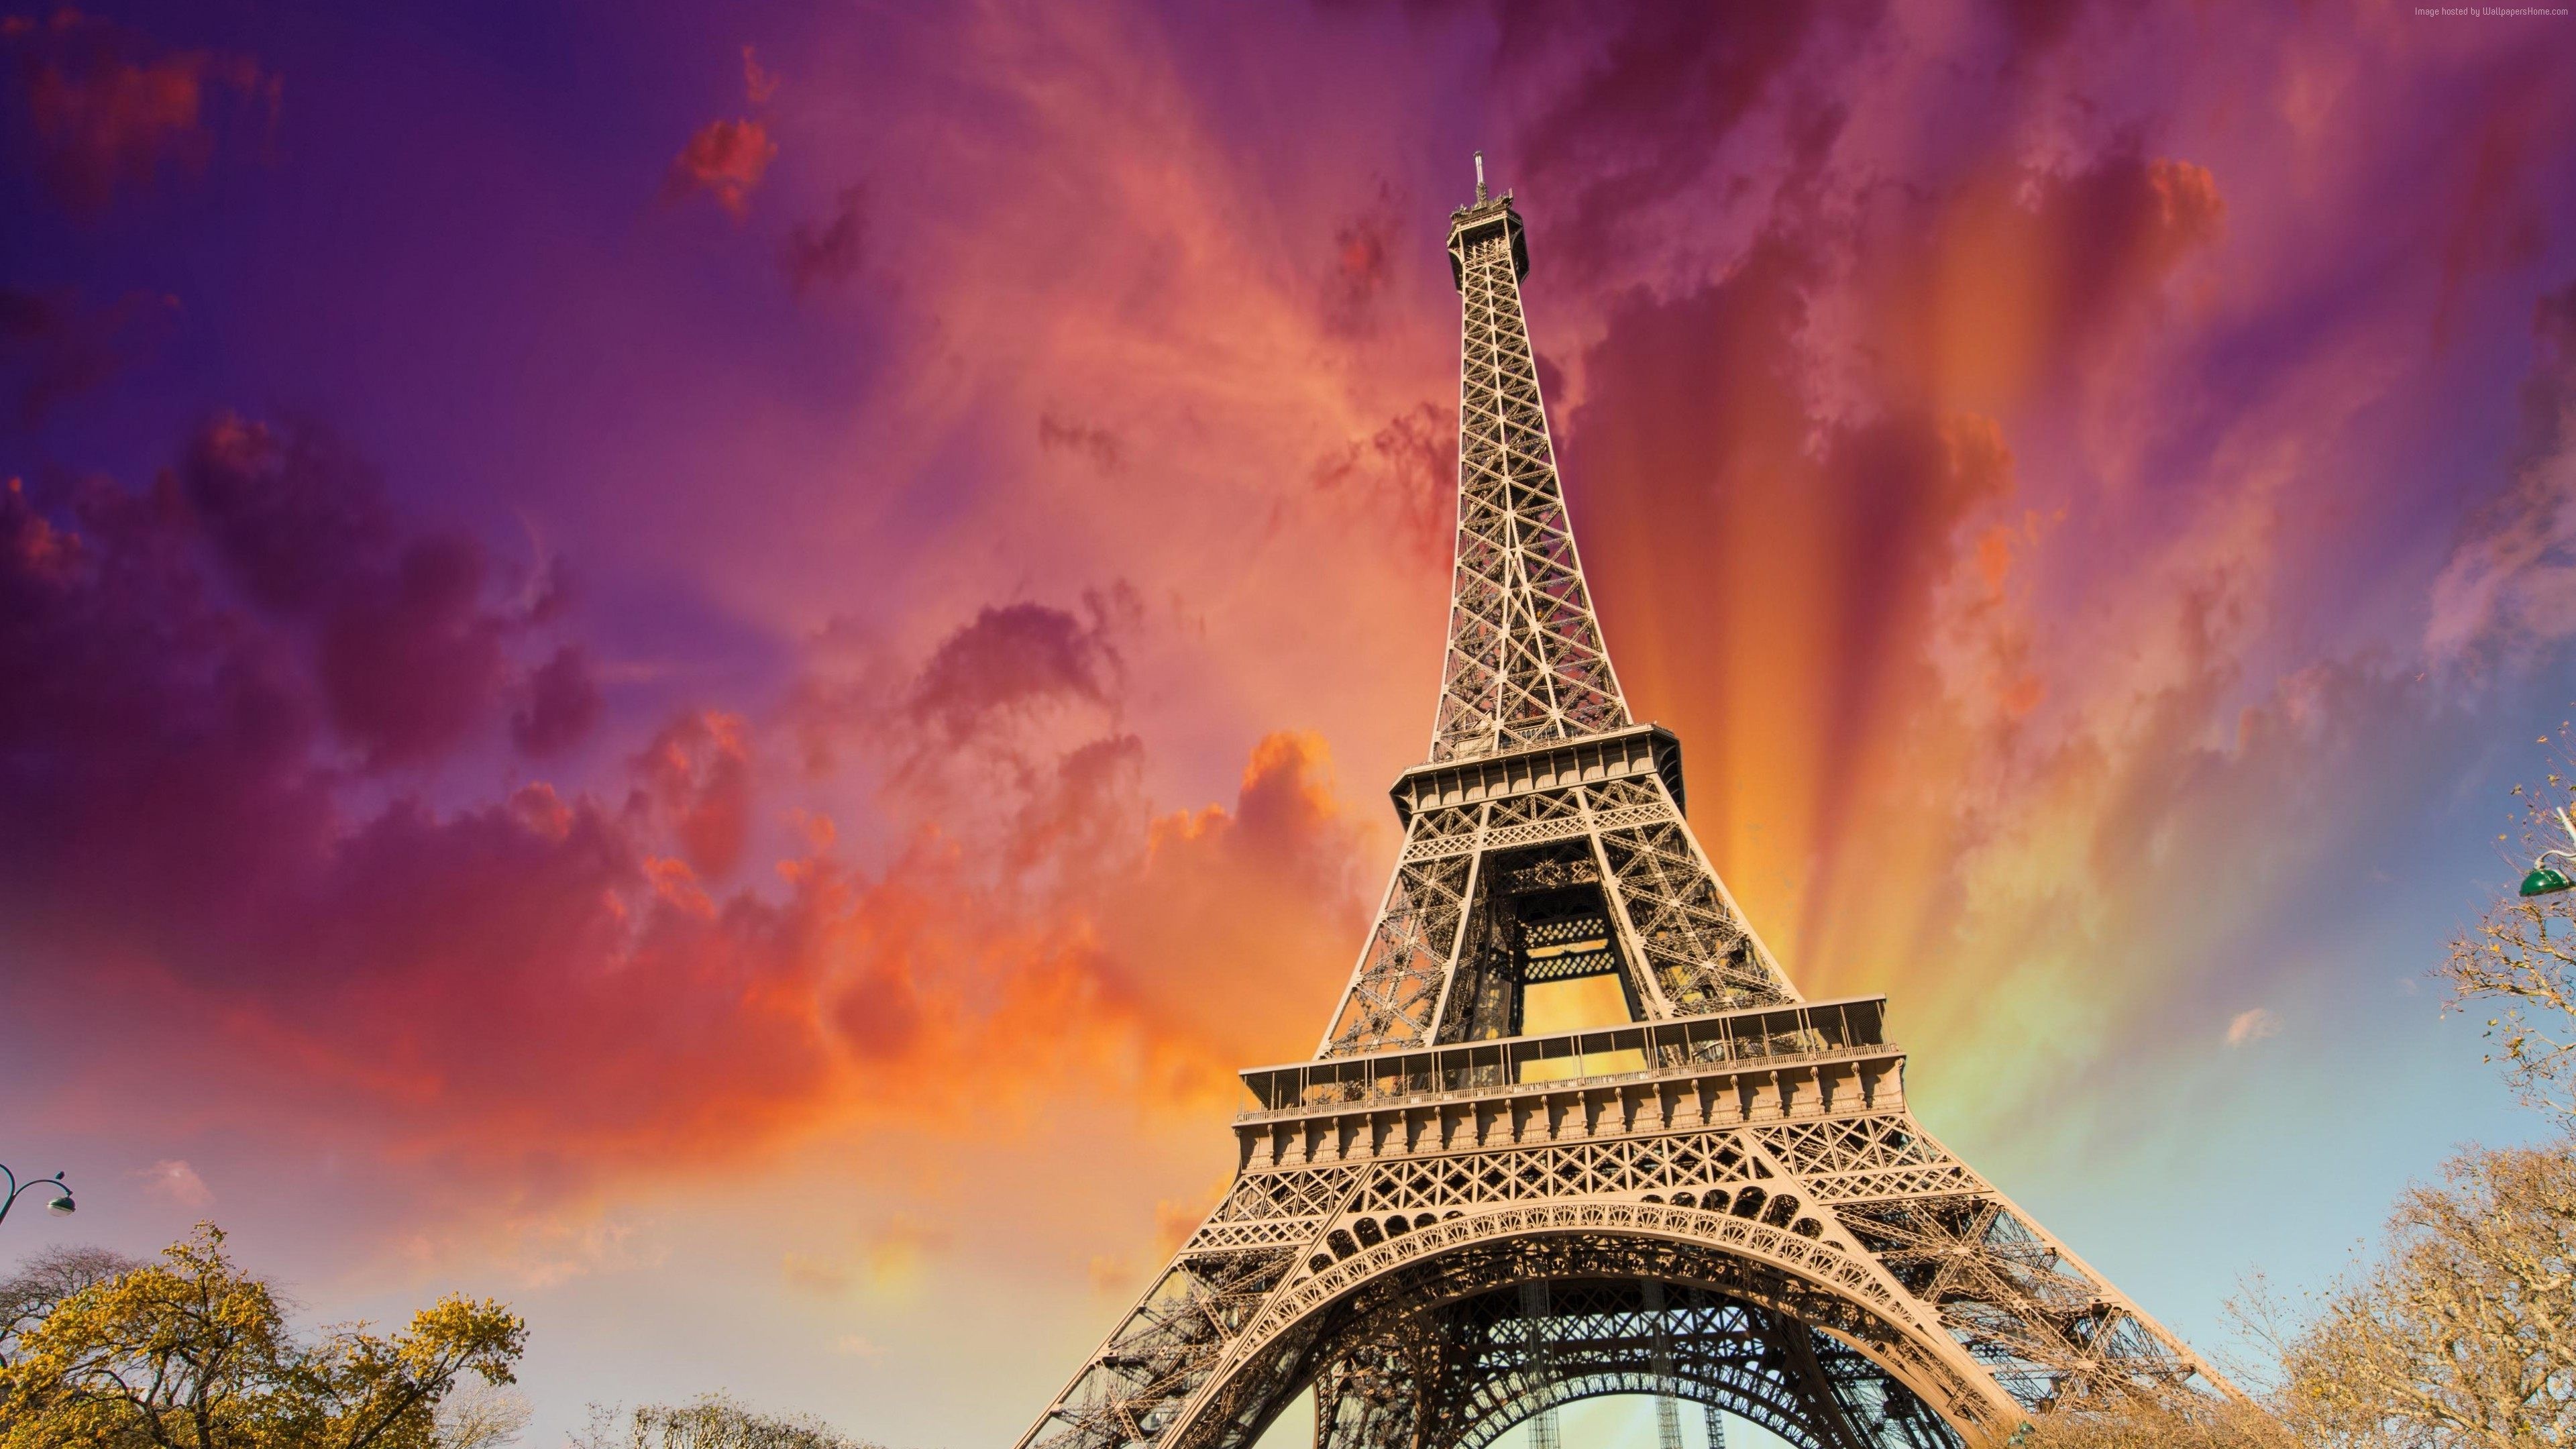 Paris: One of the best shopping cities in Europe, if not the world. 3840x2160 4K Wallpaper.